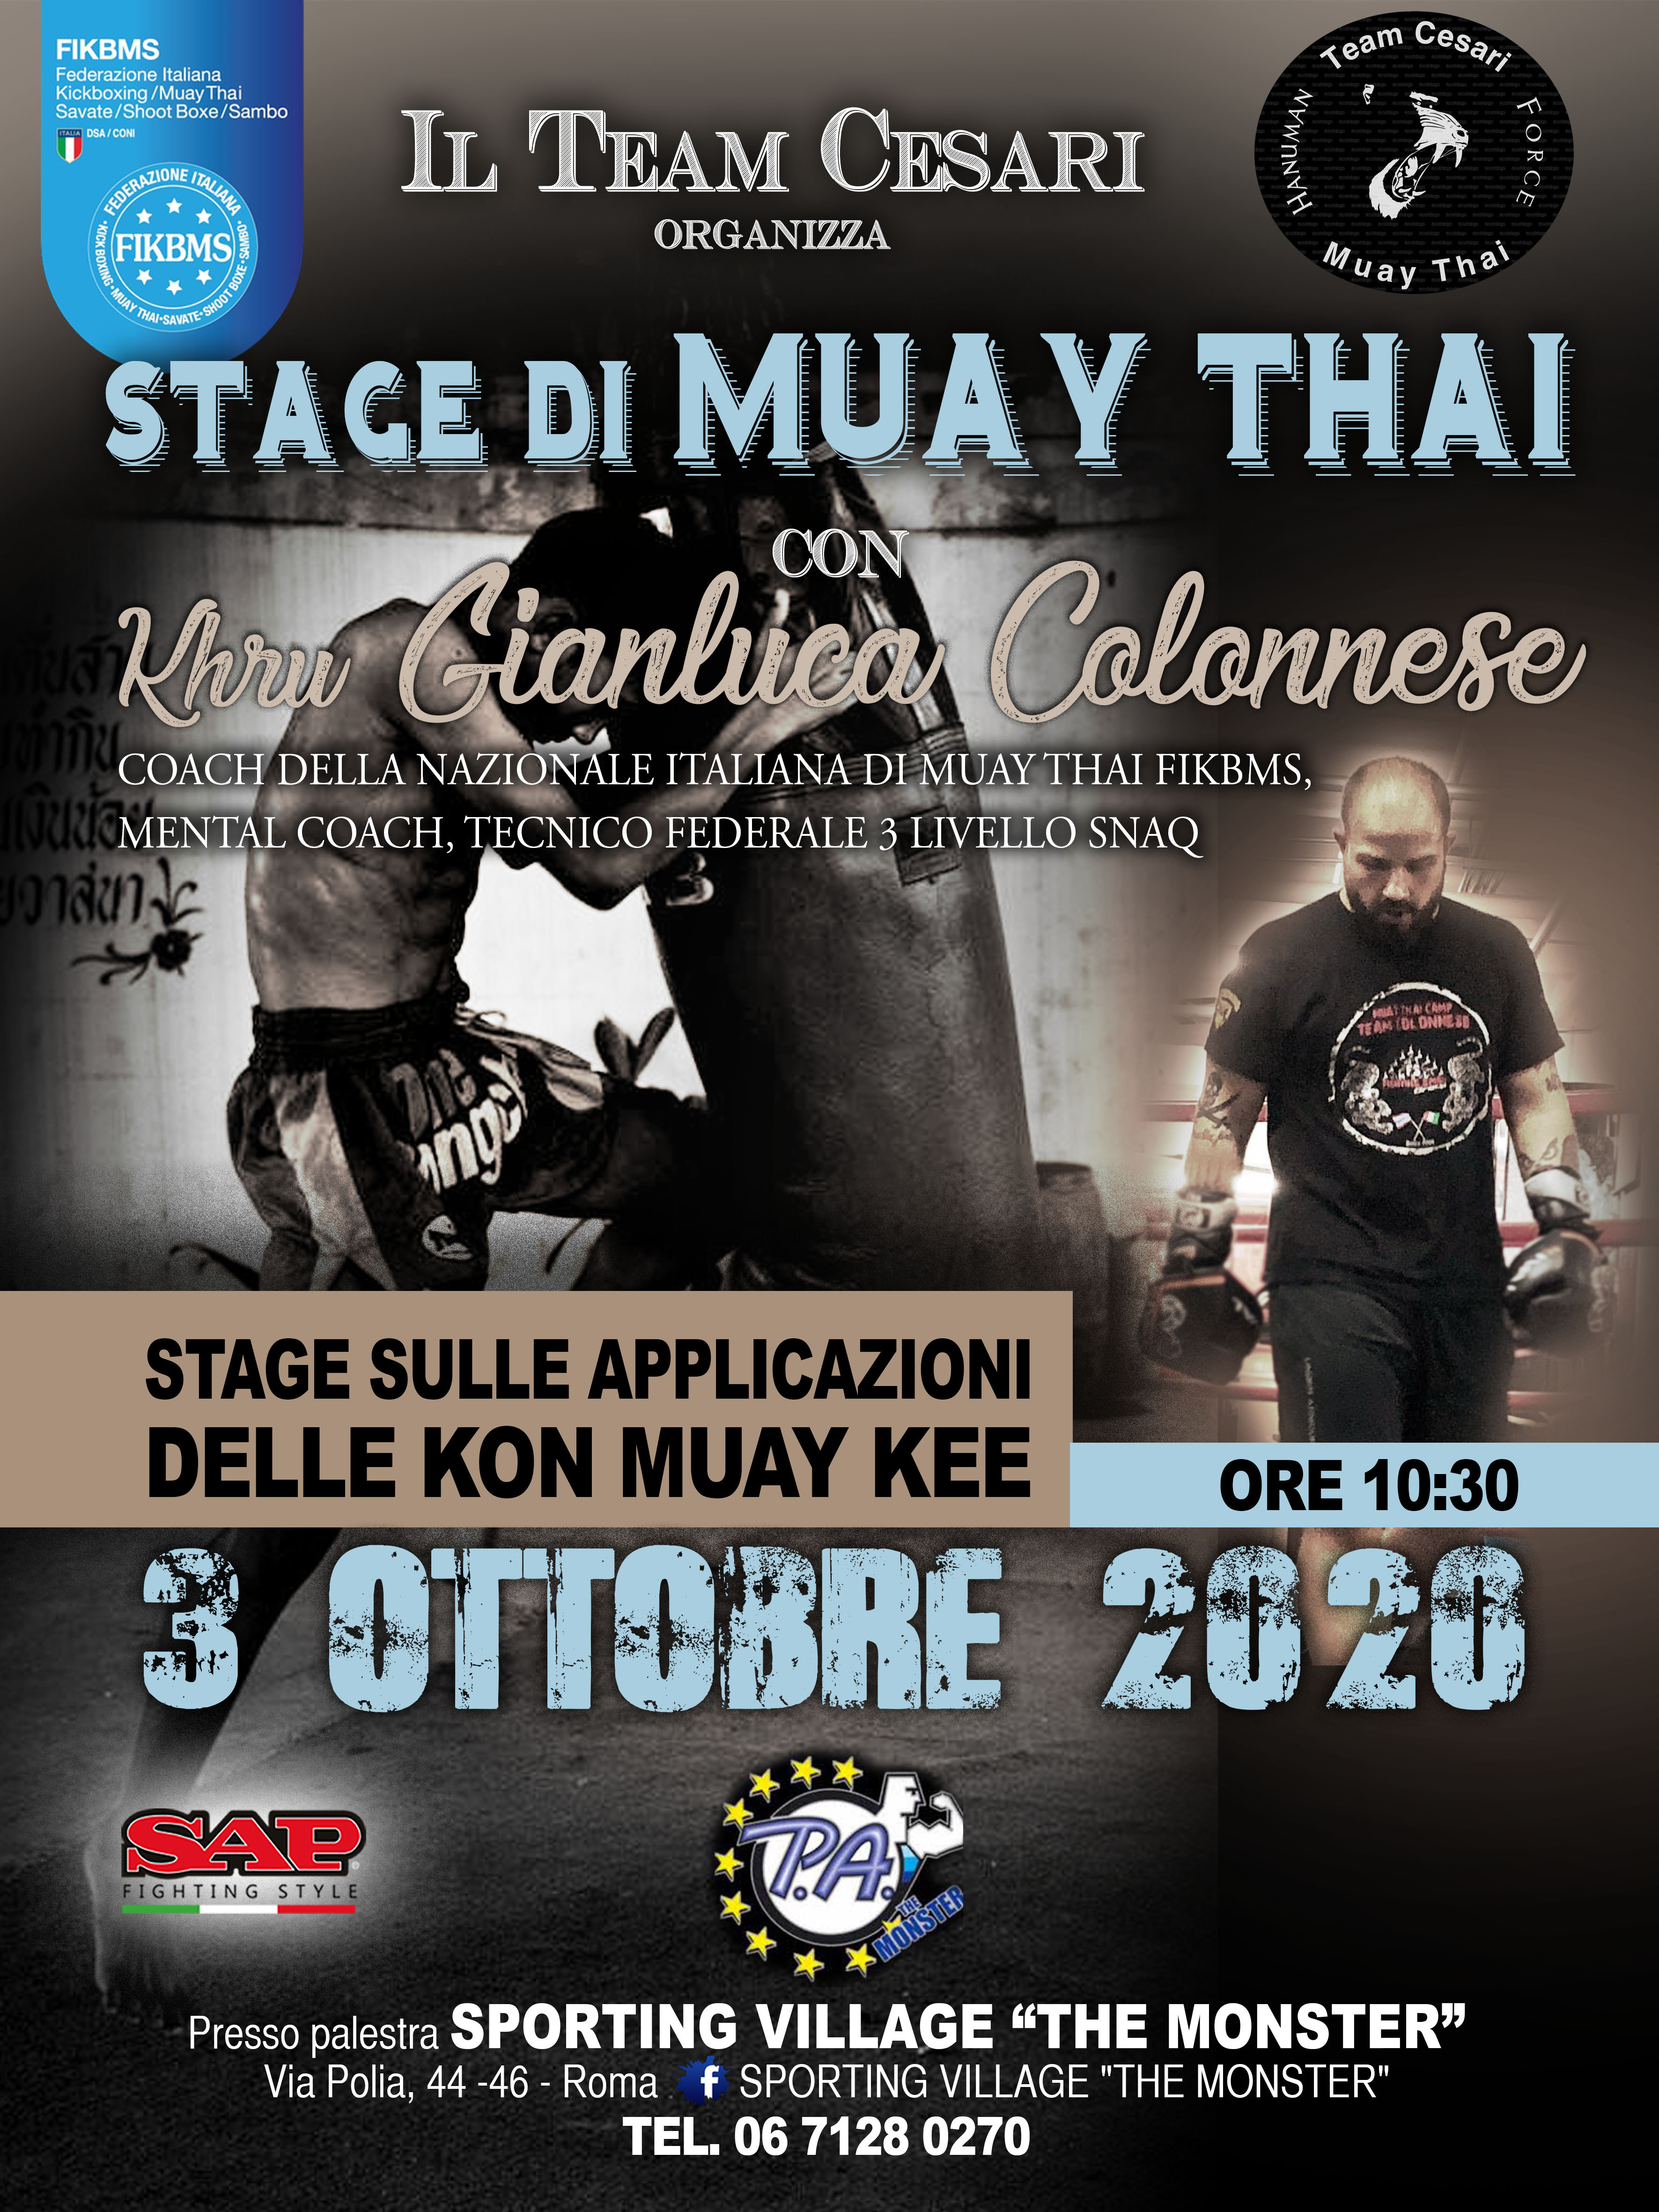 STAGE COLONNESE